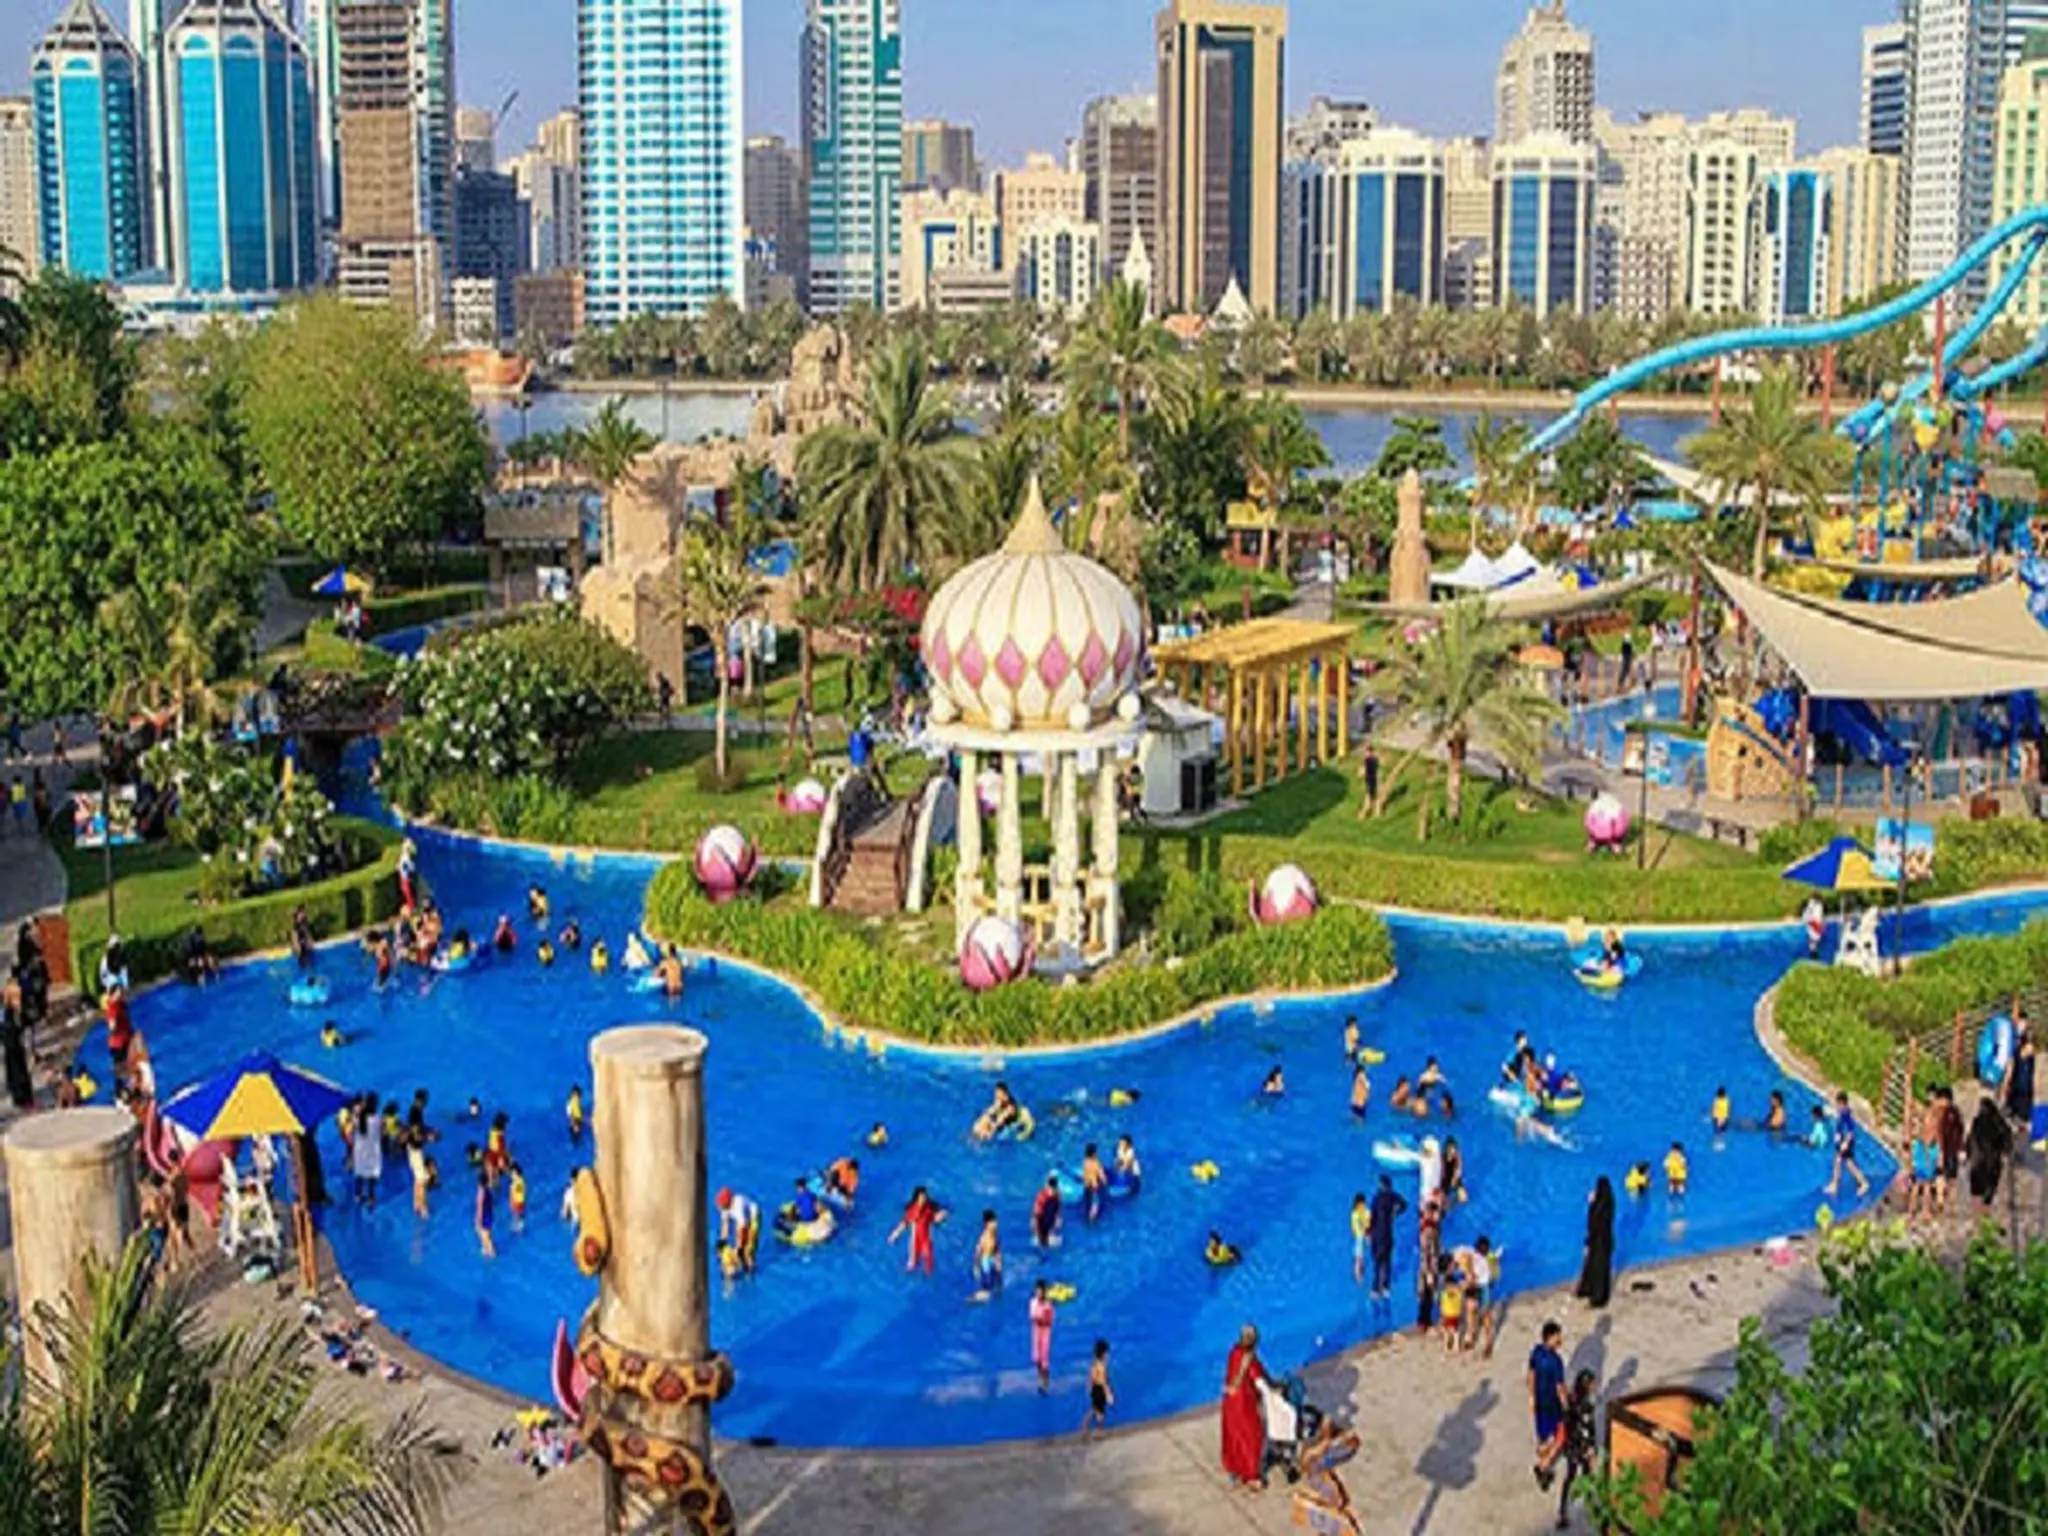 Sharjah: An new summer campaign is launched by Al Montazah Parks